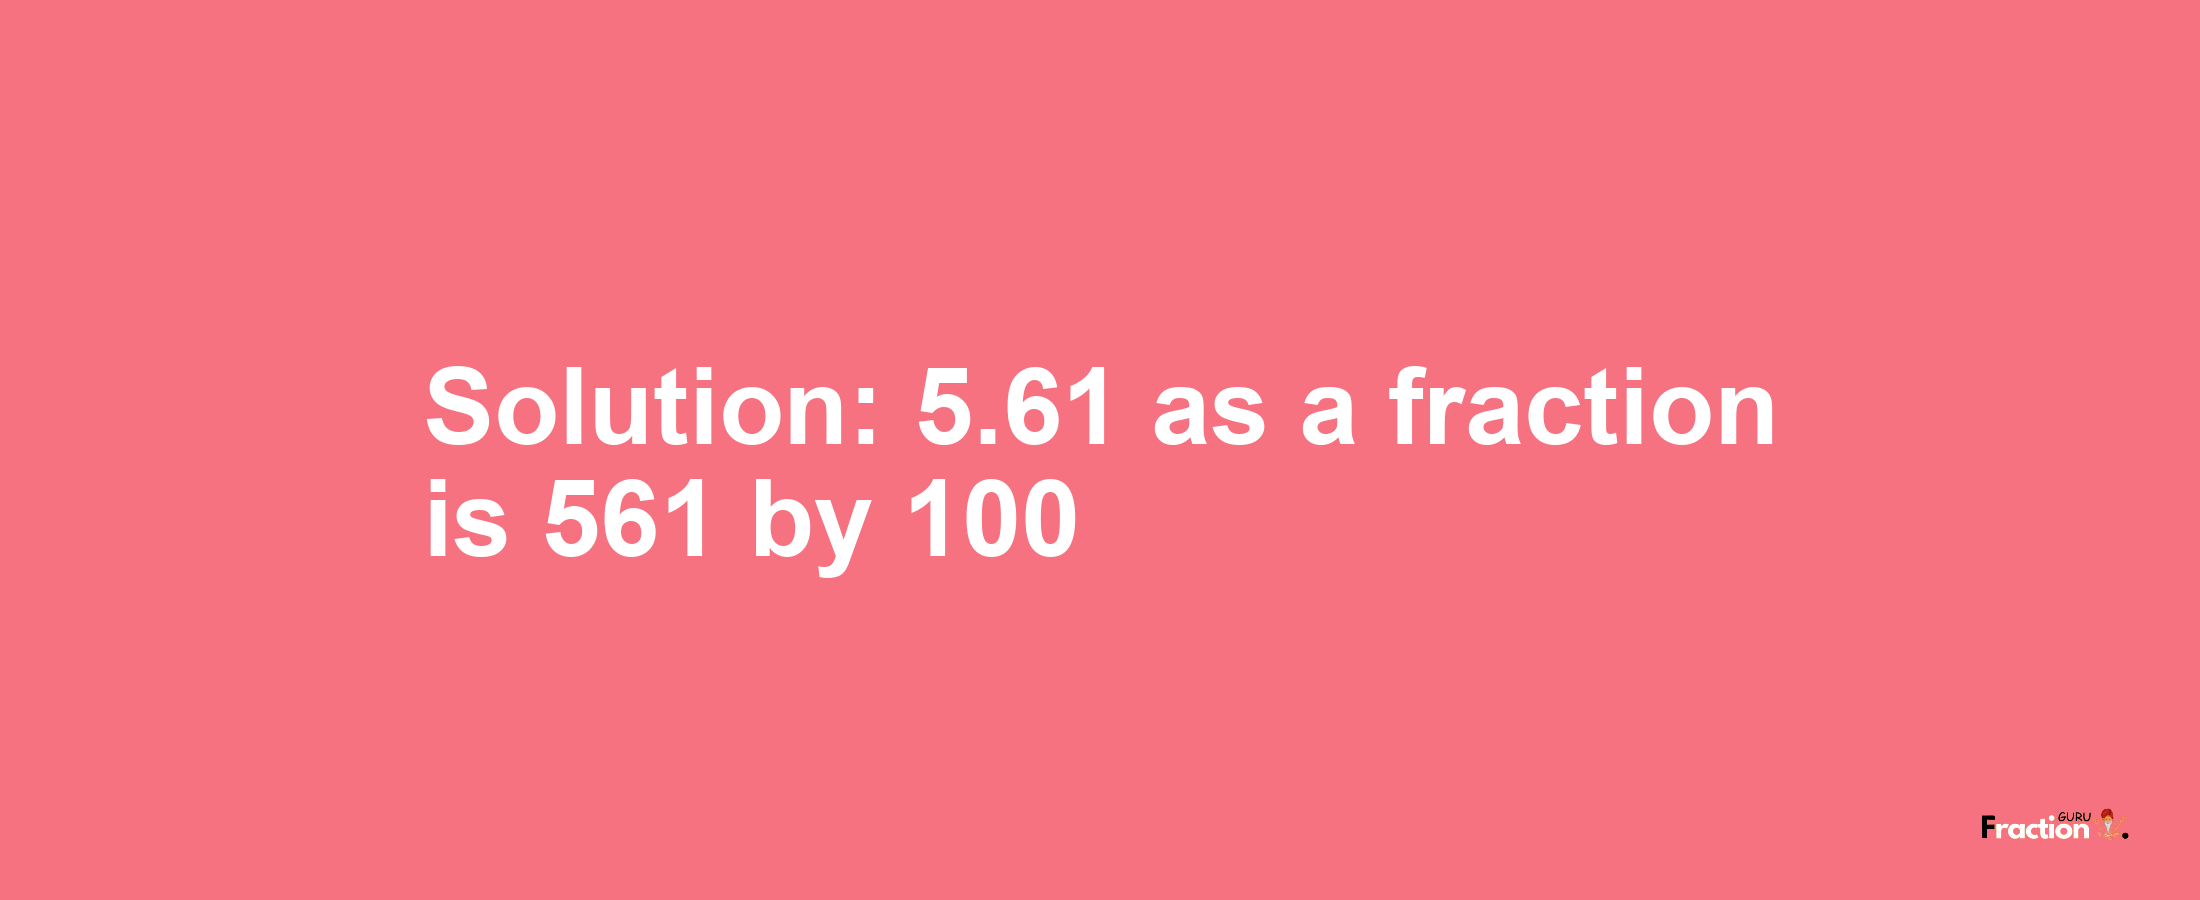 Solution:5.61 as a fraction is 561/100